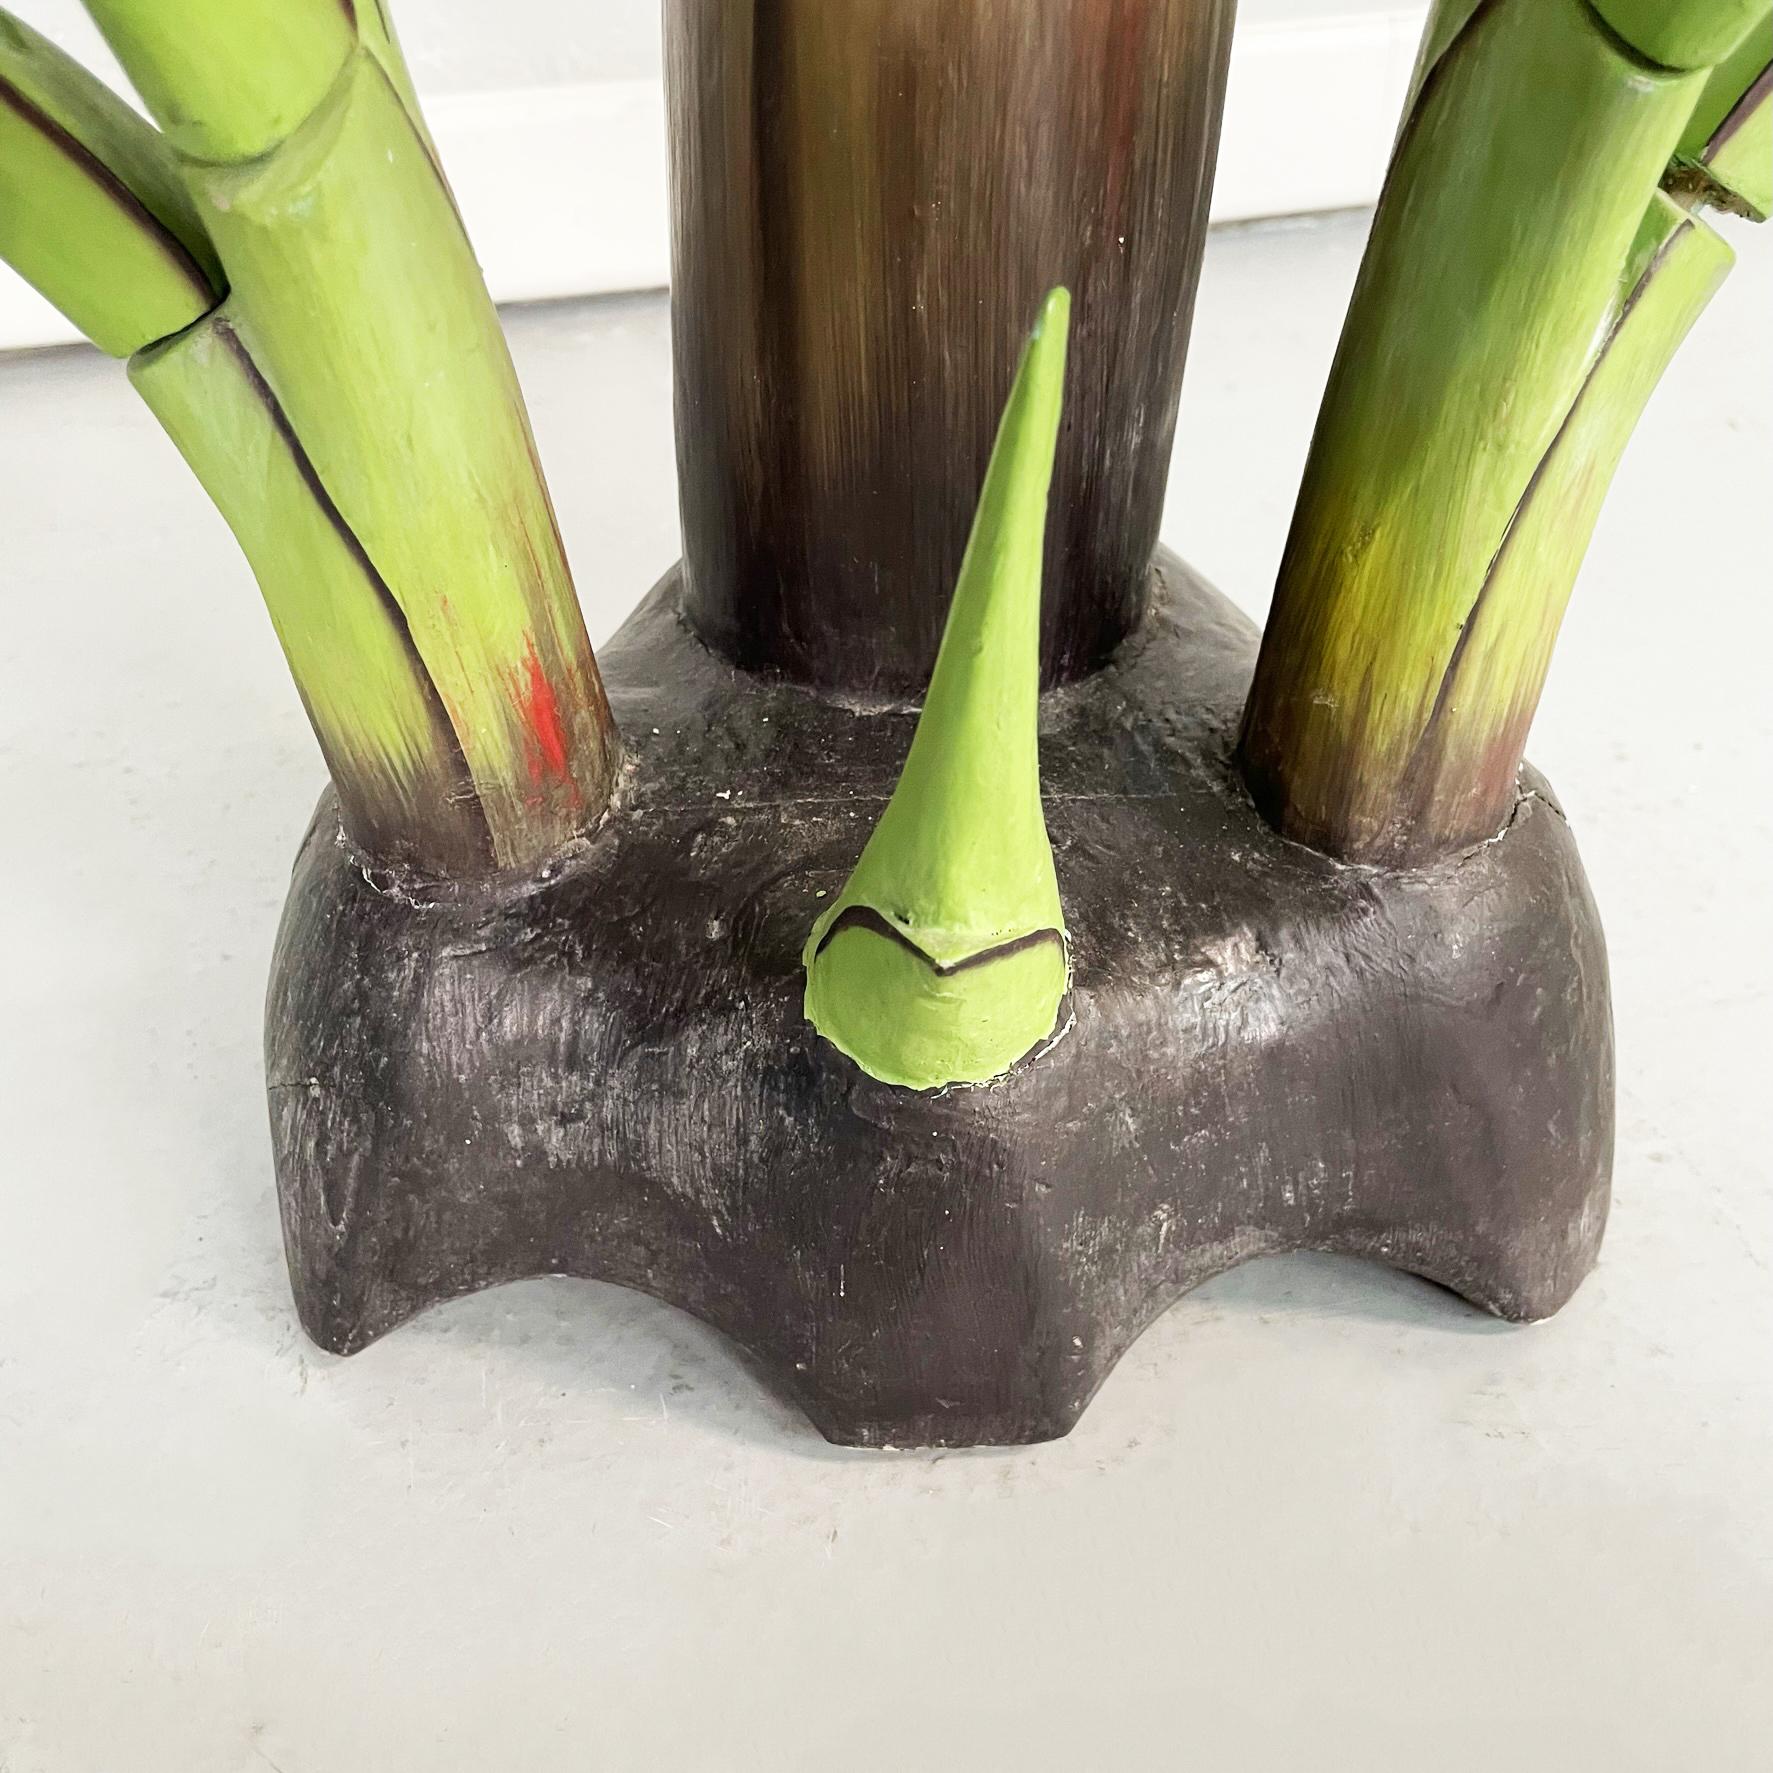 Italian Mid-Century Modern Wooden Sculpture of a Banana Plant, 1950s For Sale 7